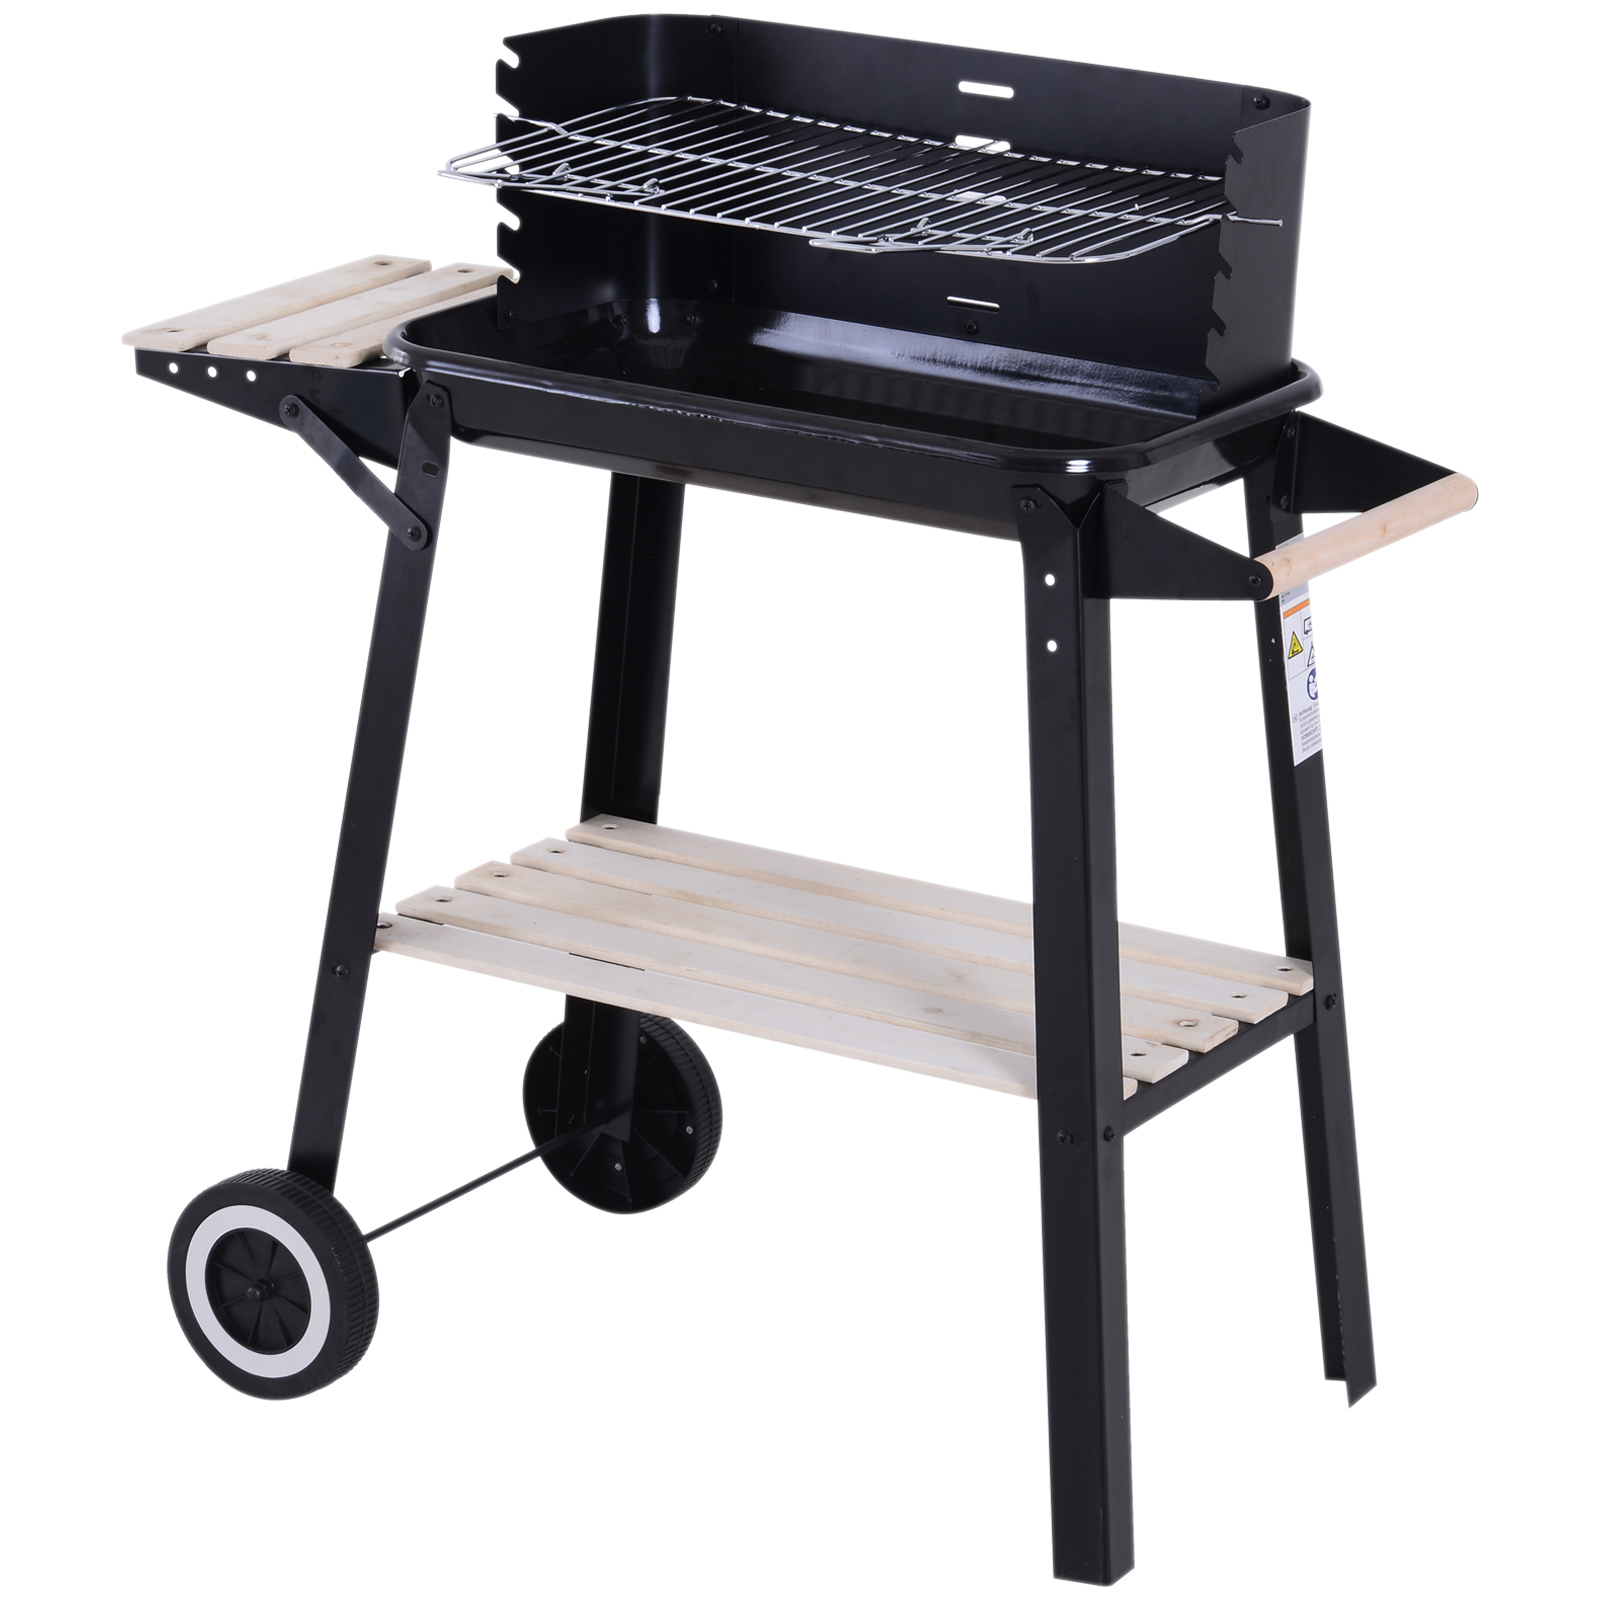 Outsunny Bbq Grill Trolley Charcoal Bbq Barbecue Grill Outdoor Patio Garden Heating Smoker With Side Trays Storage Shelf And Wheels